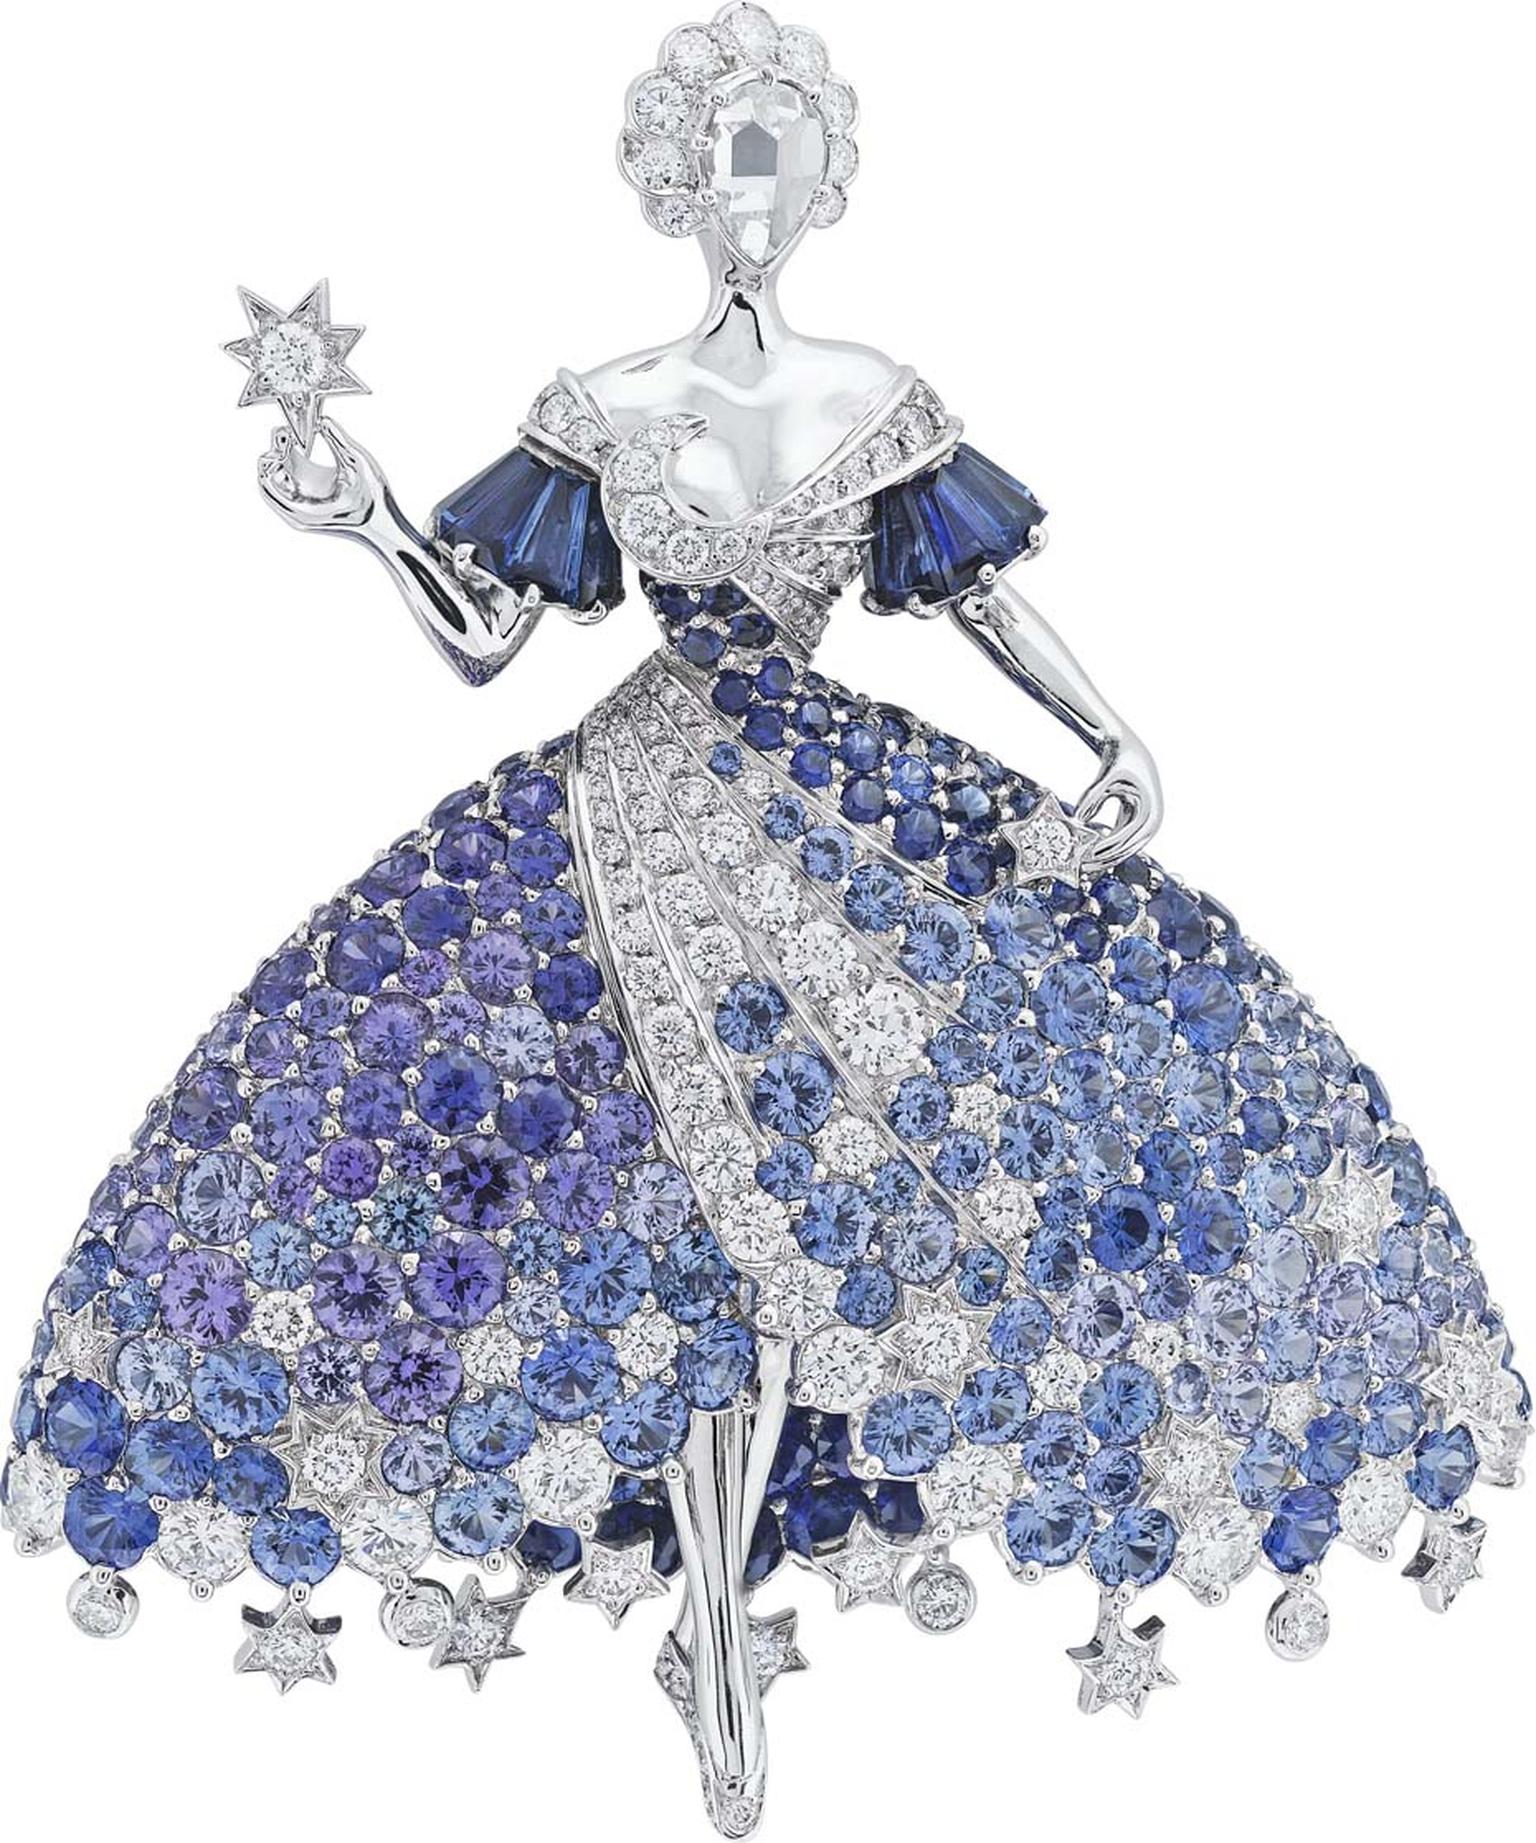 Van Cleef & Arpels Peau d'Âne collection white gold Moon Dress brooch with diamonds, blue spinels, blue and purple tanzanites, and blue and purple sapphires.